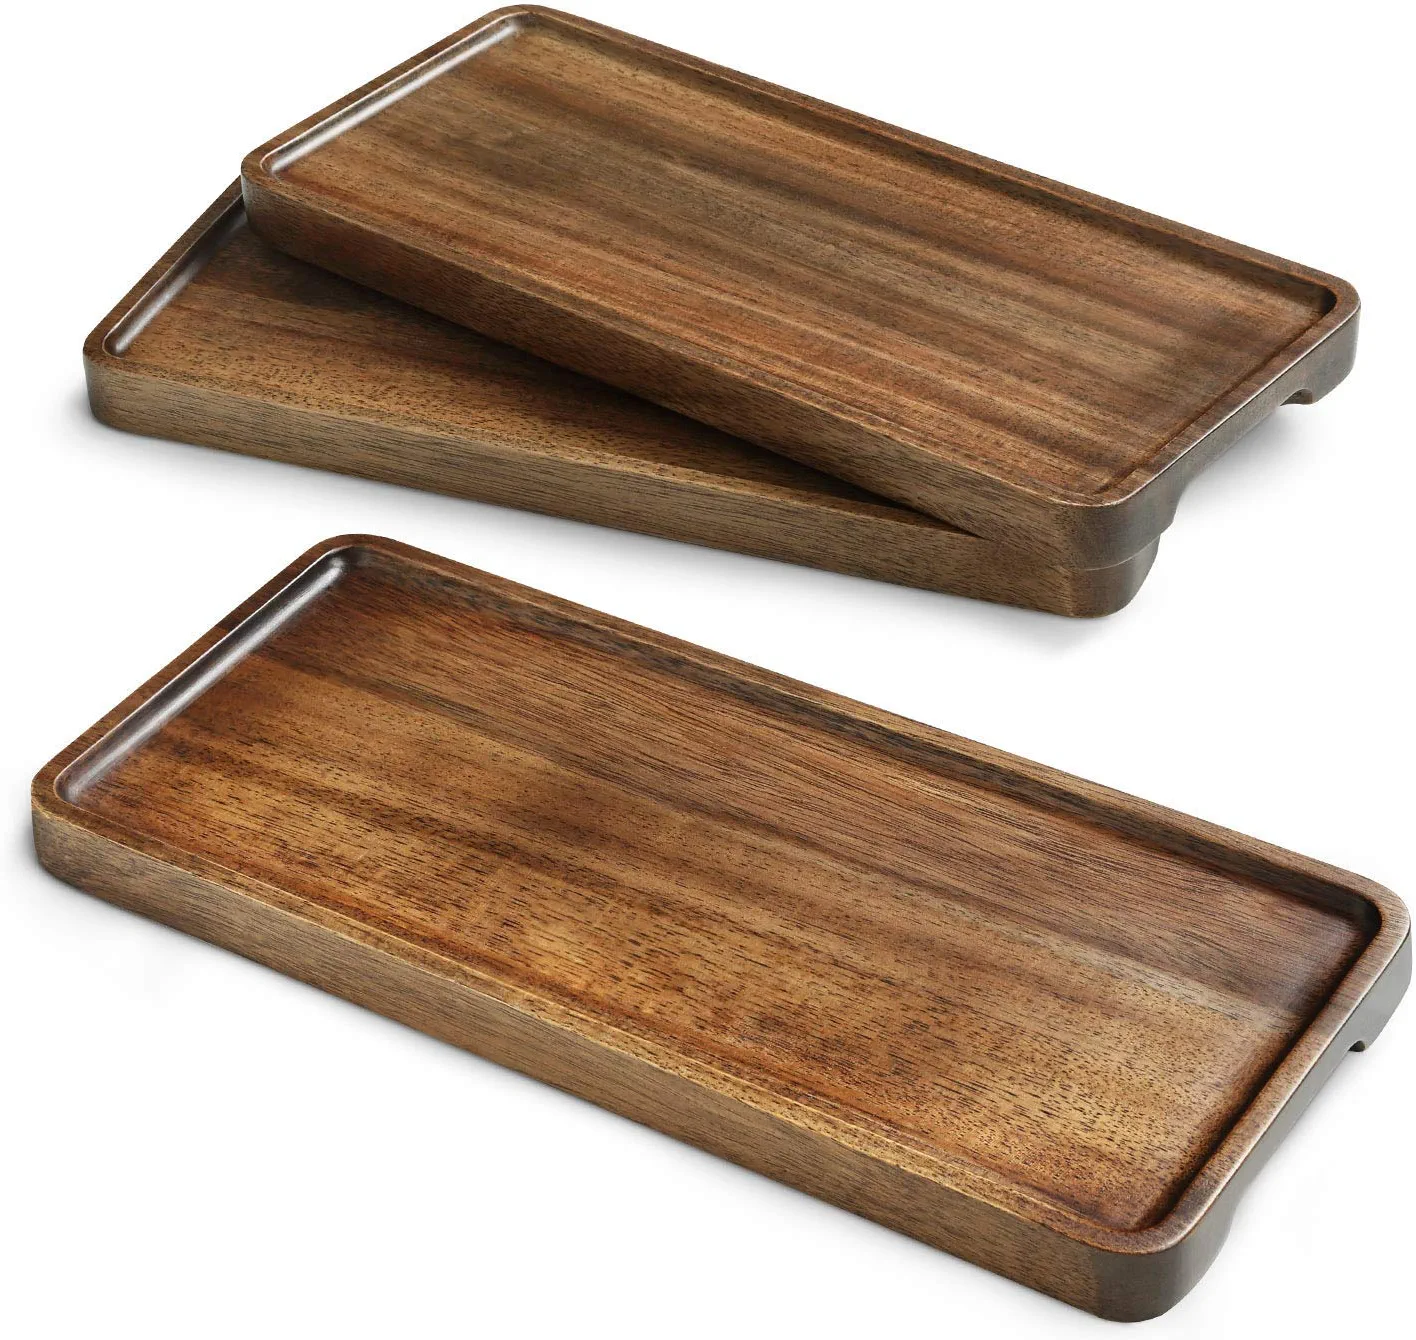 Handcrafted Wooden Serving Platters Set of 3| Natural Wood Trays